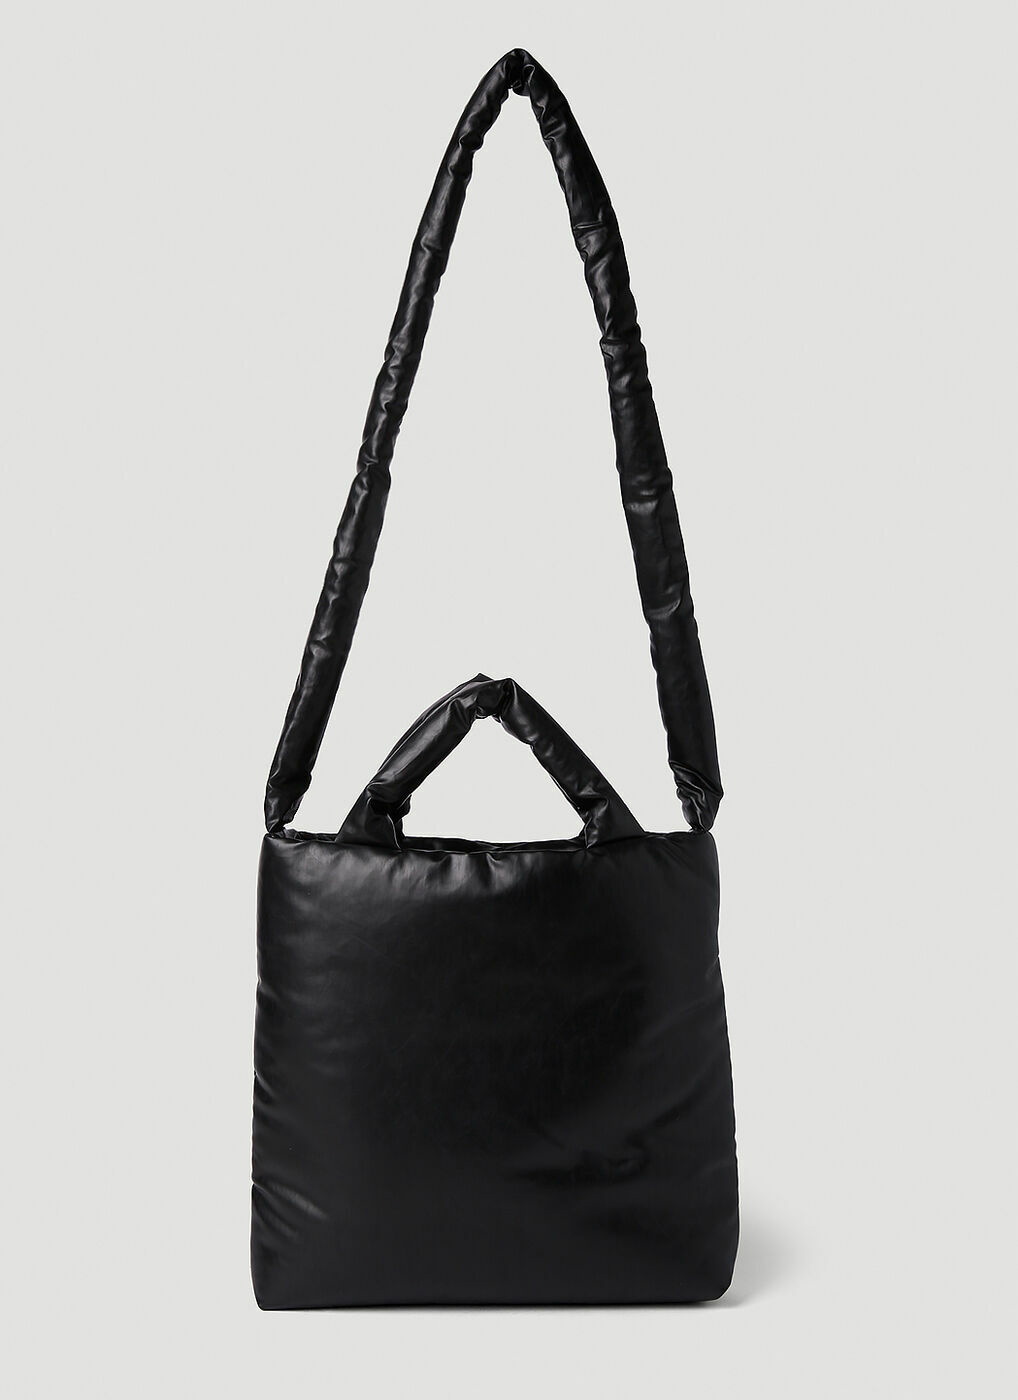 Pillow Oil Small Tote Bag in Black Kassl Editions